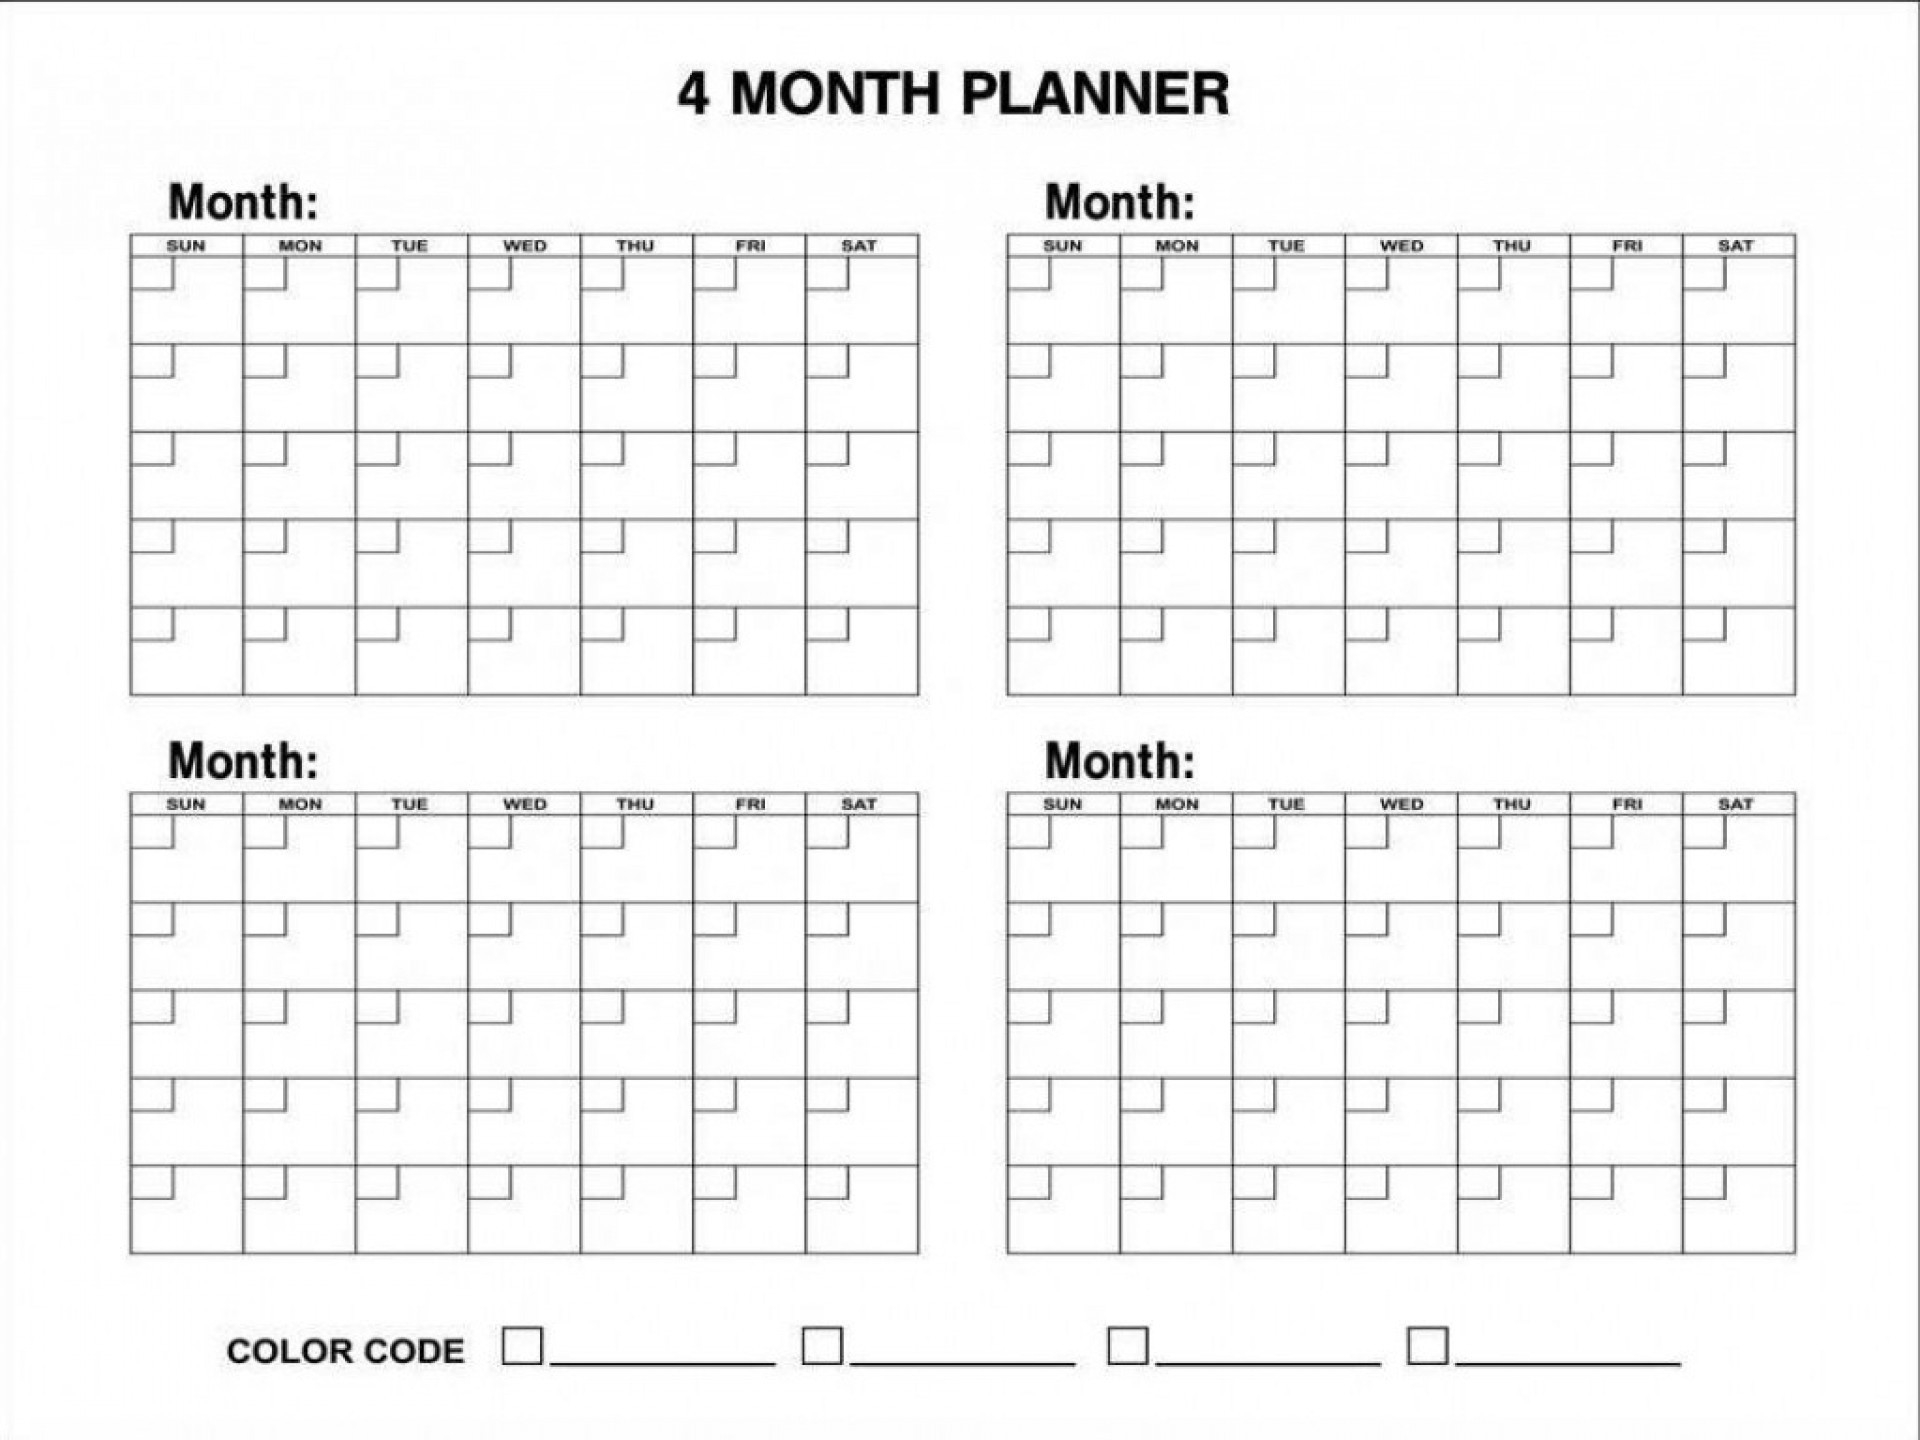 6 Month Planning Calendar Template • Printable Blank-6 Month Planner Template